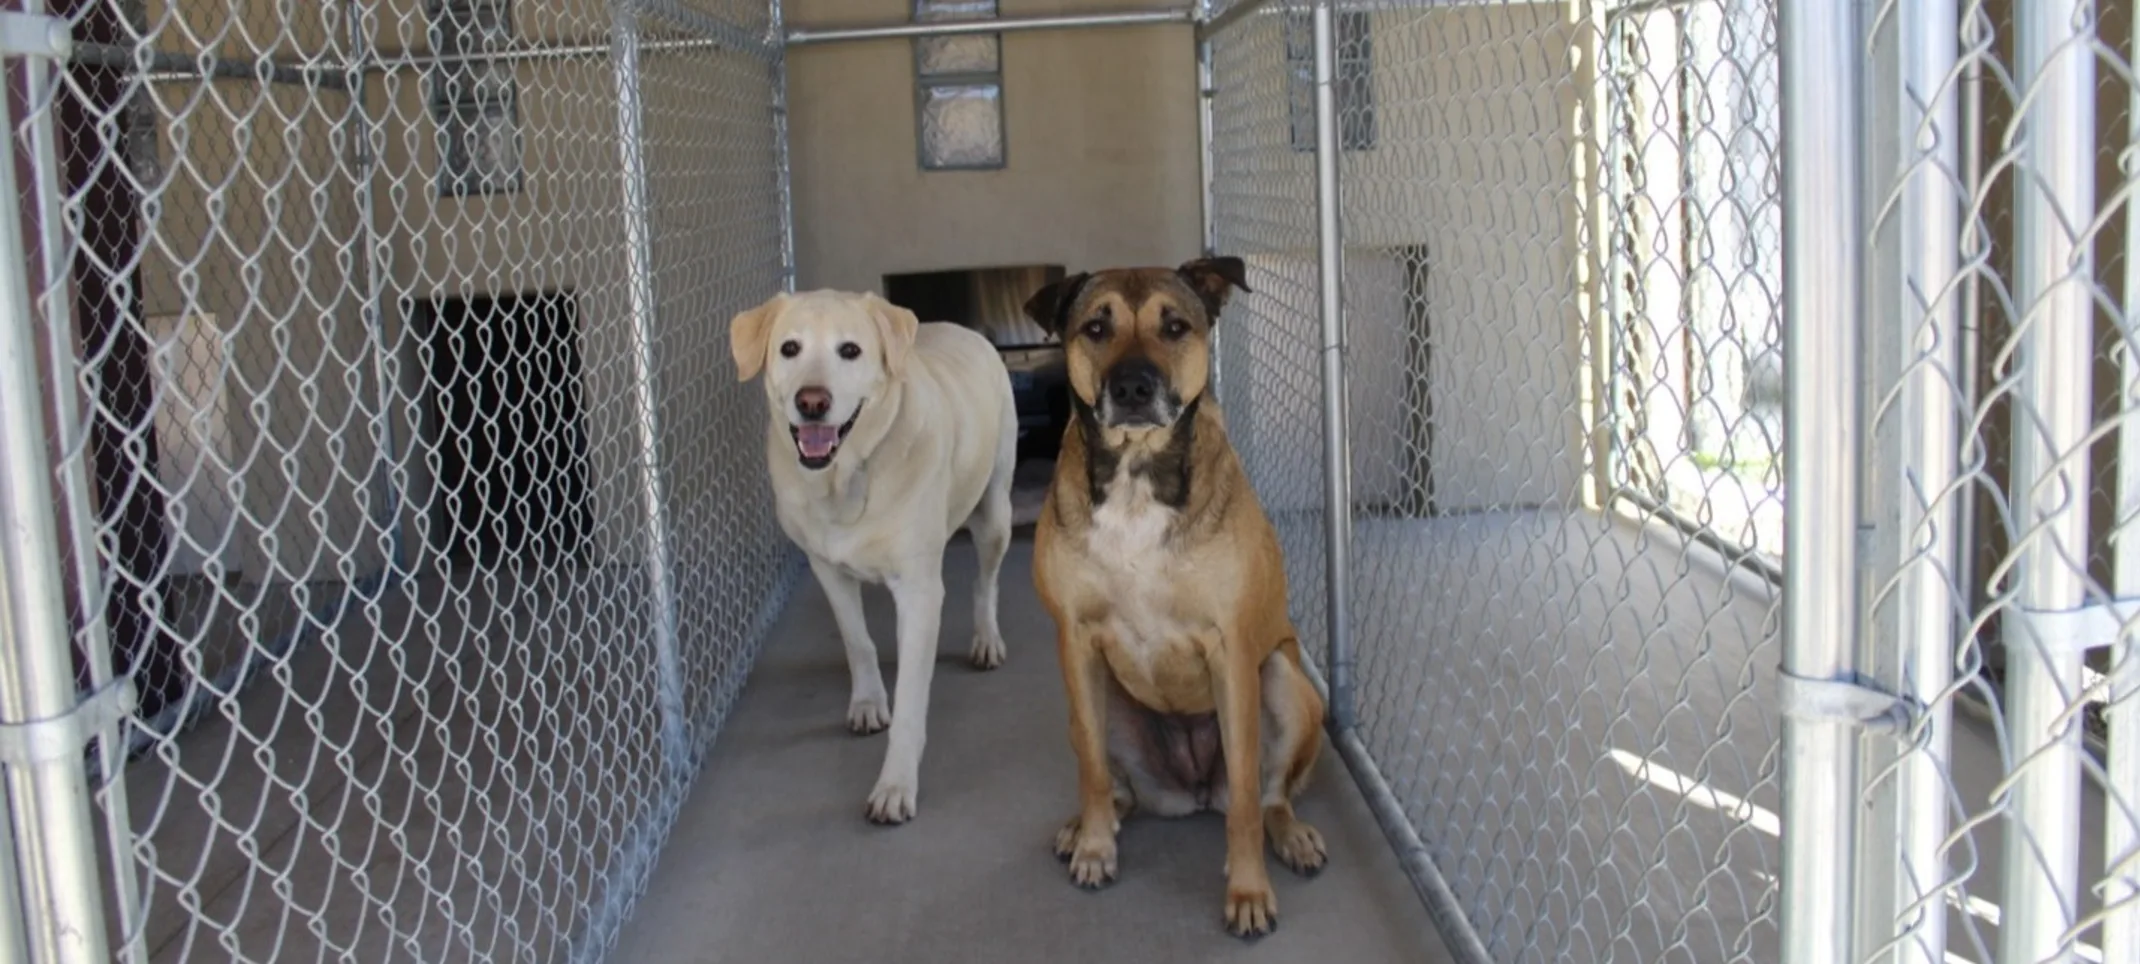 Two dogs in a large dog boarding room together.